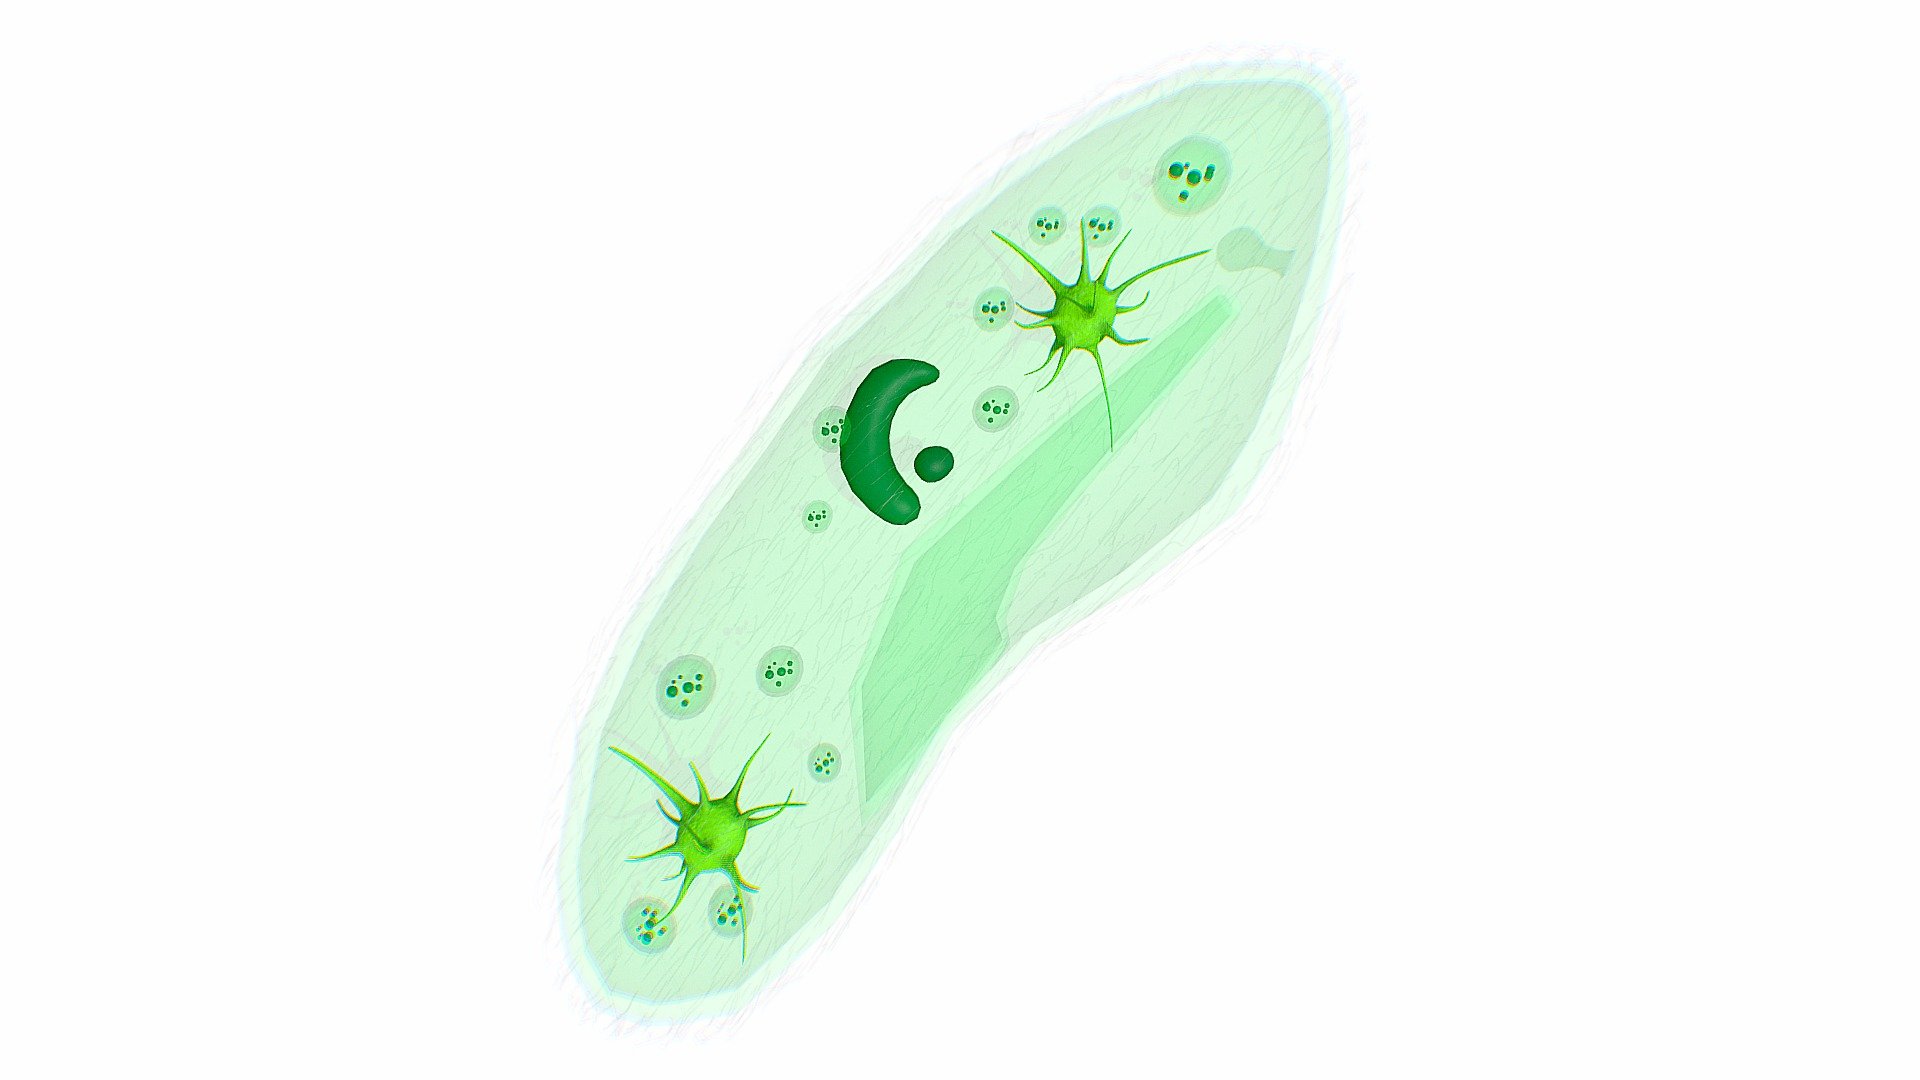 Paramecium is a genus of unicellular ciliated protozoa. They are characterised by the presence of thousands of cilia covering their body. They are found in freshwater, marine and brackish water. They are also found attached to the surface. Reproduction is primarily through asexual means (binary fission) 3d model